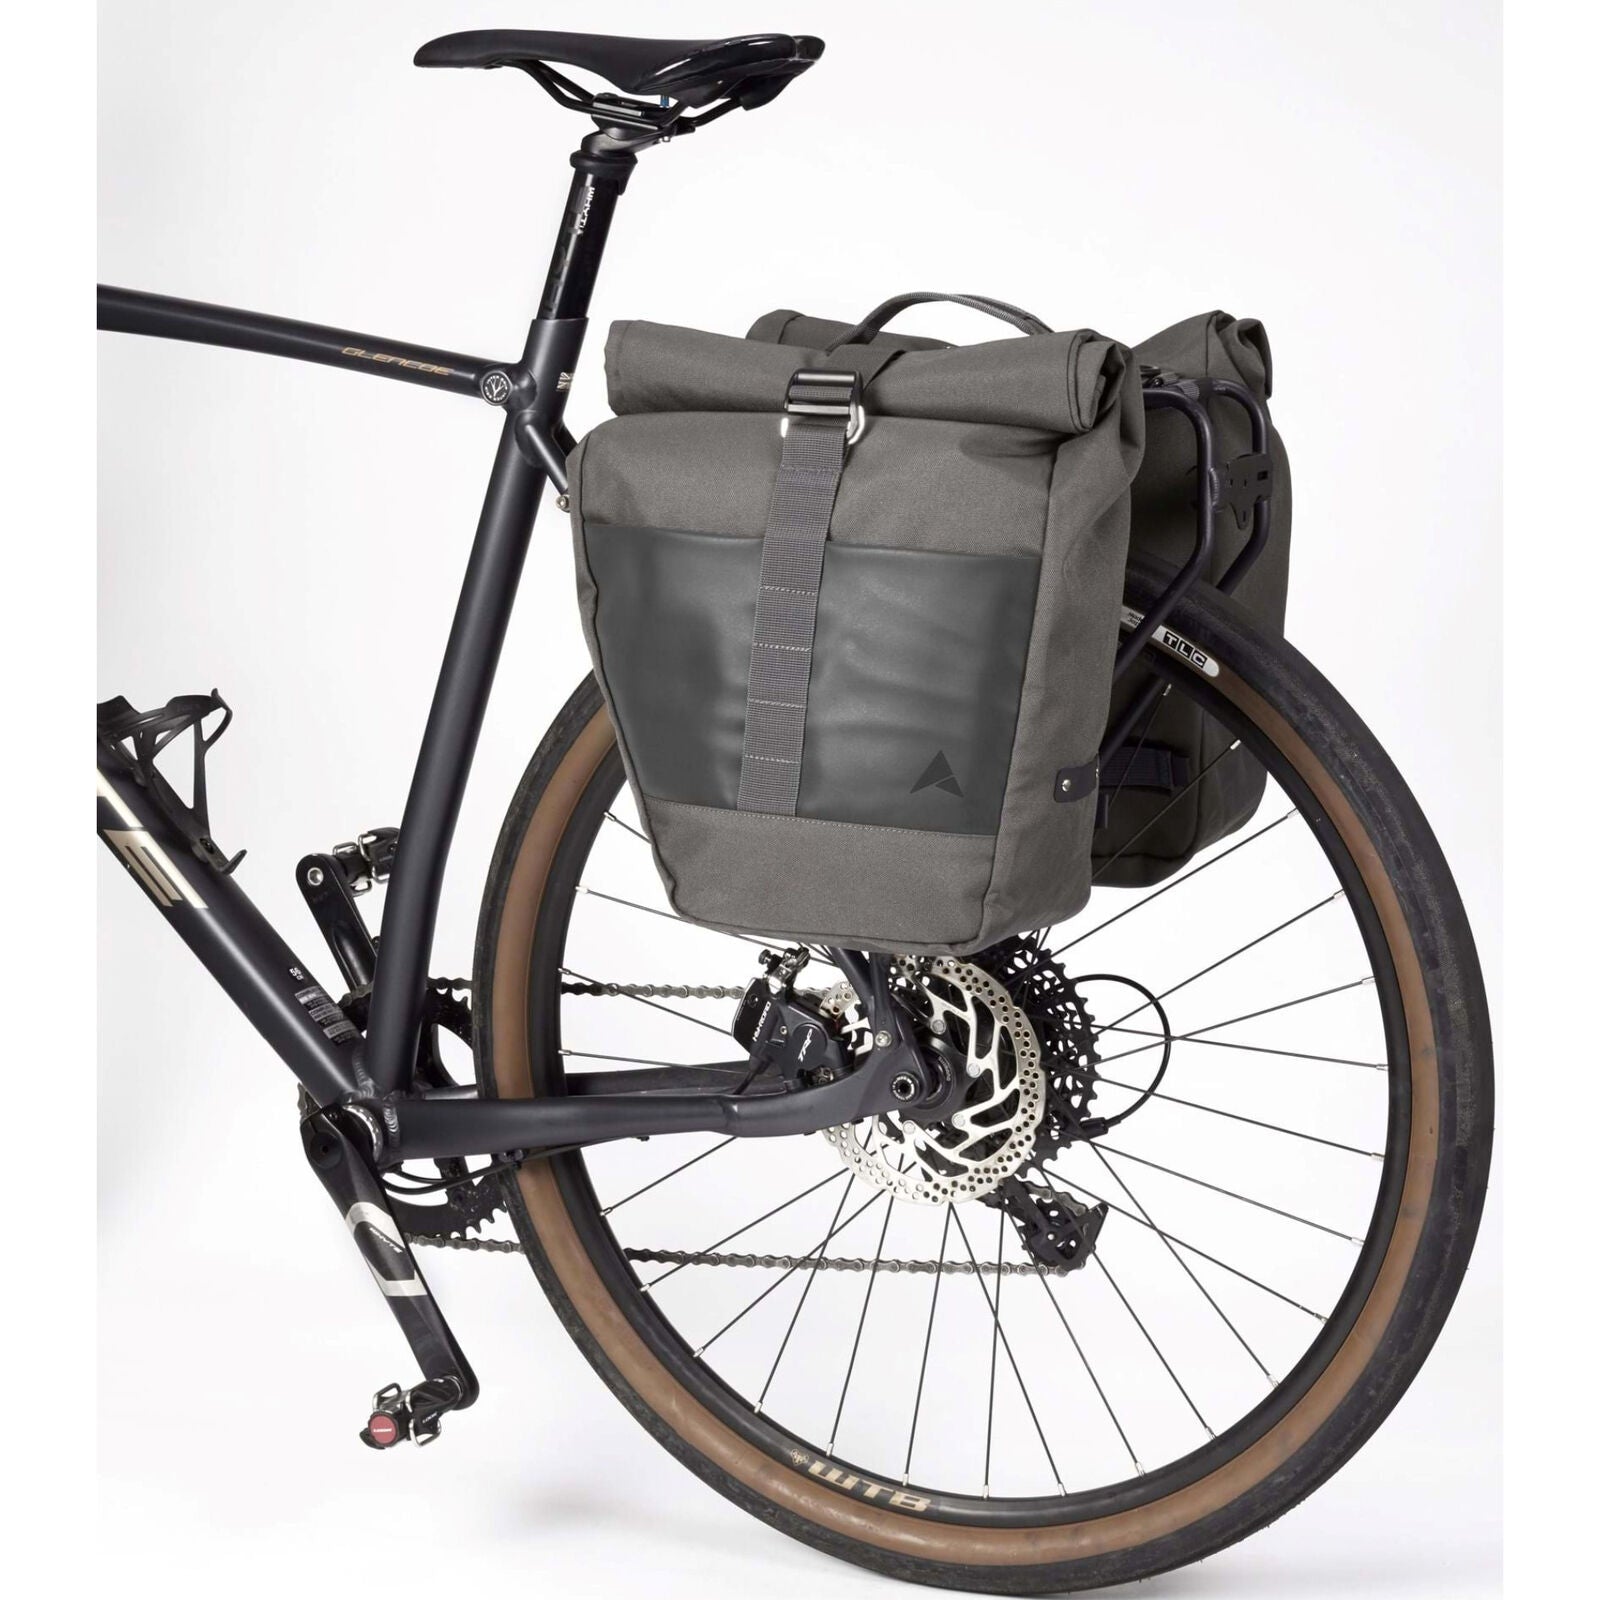 Versatile Altura Grid Cycling Pannier Roll Up Pair, each with 15L capacity. Ideal for commuting, touring, and bike packing. Roll up design for compact storage. Features roll-top closure, grab handle, reflective details, and DWR finish. Can be used individually or as a pair.